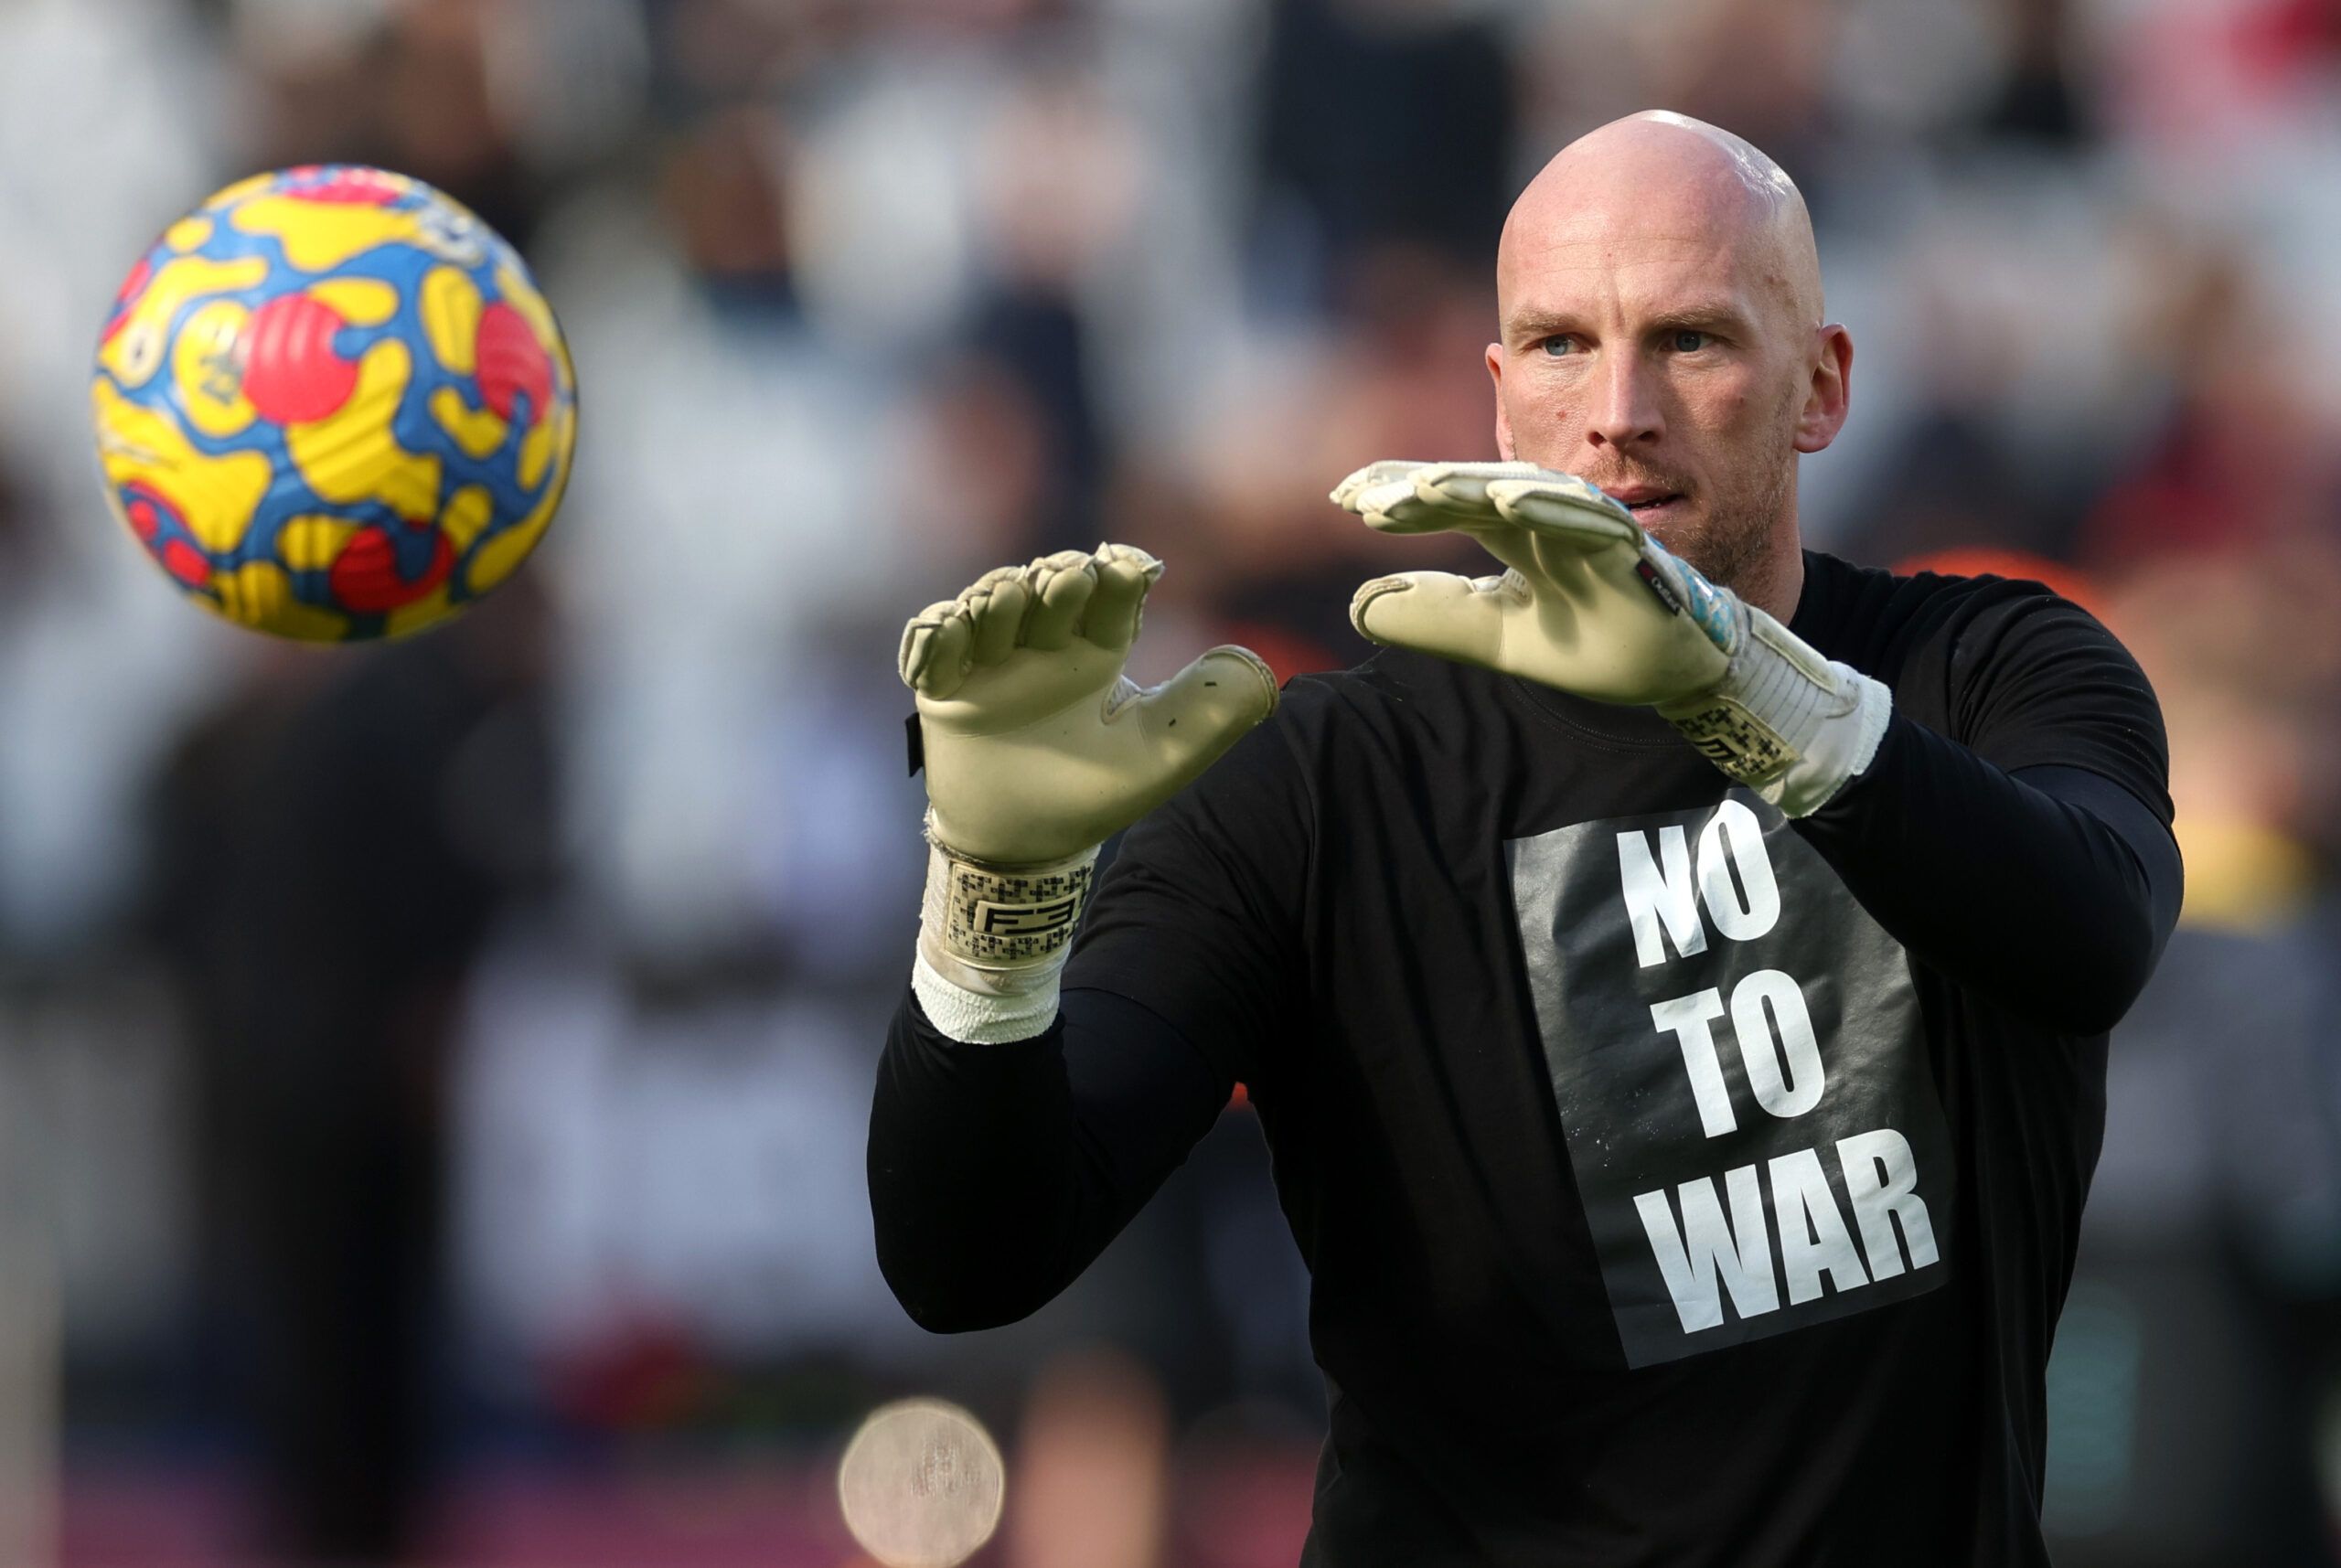 Soccer Football - Premier League - West Ham United v Wolverhampton Wanderers - London Stadium, London, Britain - February 27, 2022  Wolverhampton Wanderers' John Ruddy wears a no to war shirt in support of Ukraine during the warm up before the match Action Images via Reuters/Paul Childs